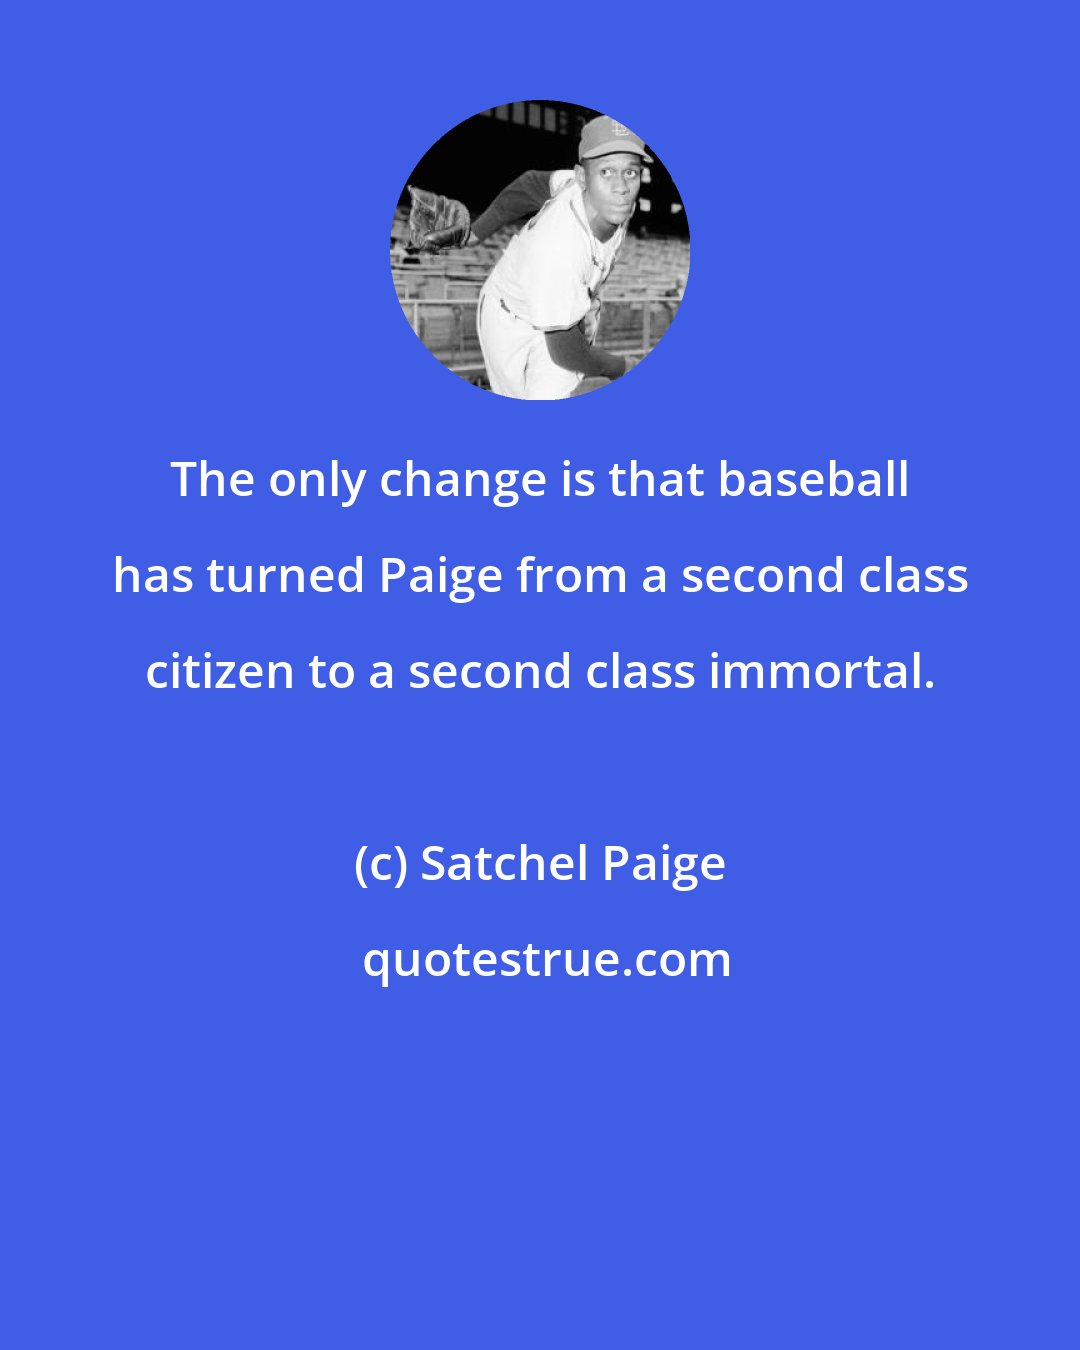 Satchel Paige: The only change is that baseball has turned Paige from a second class citizen to a second class immortal.